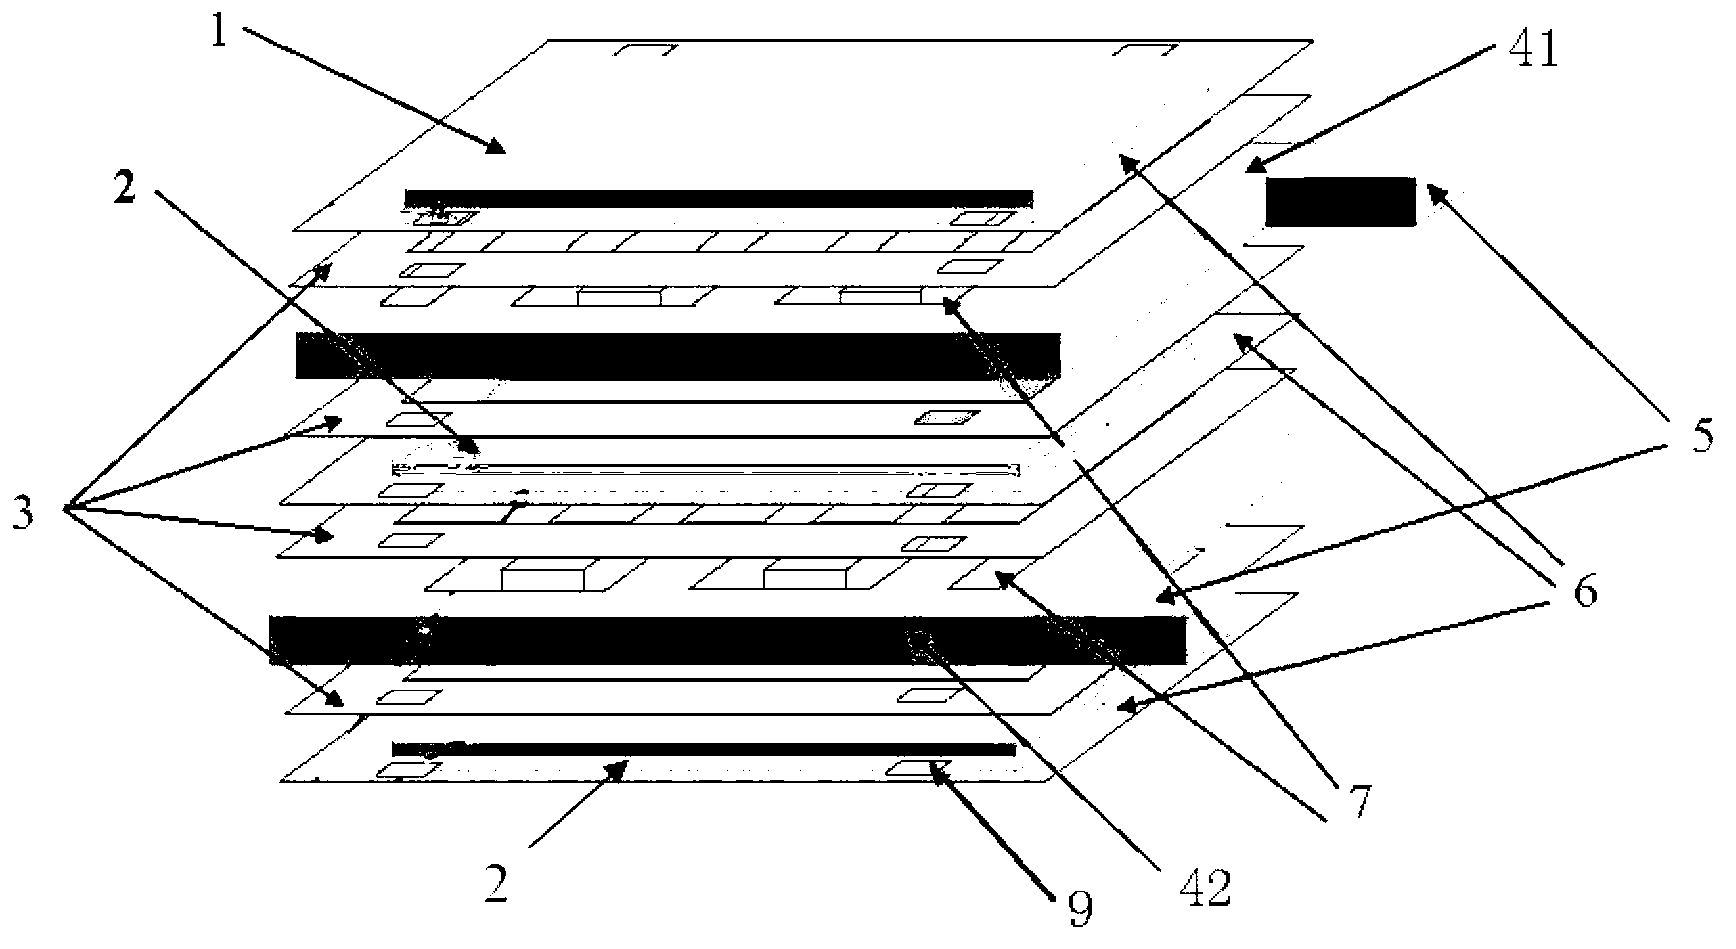 IT-SOFC (Intermediate Temperature Solid Oxide Fuel Cell) stack alloy connecting body and connecting method of cell stack